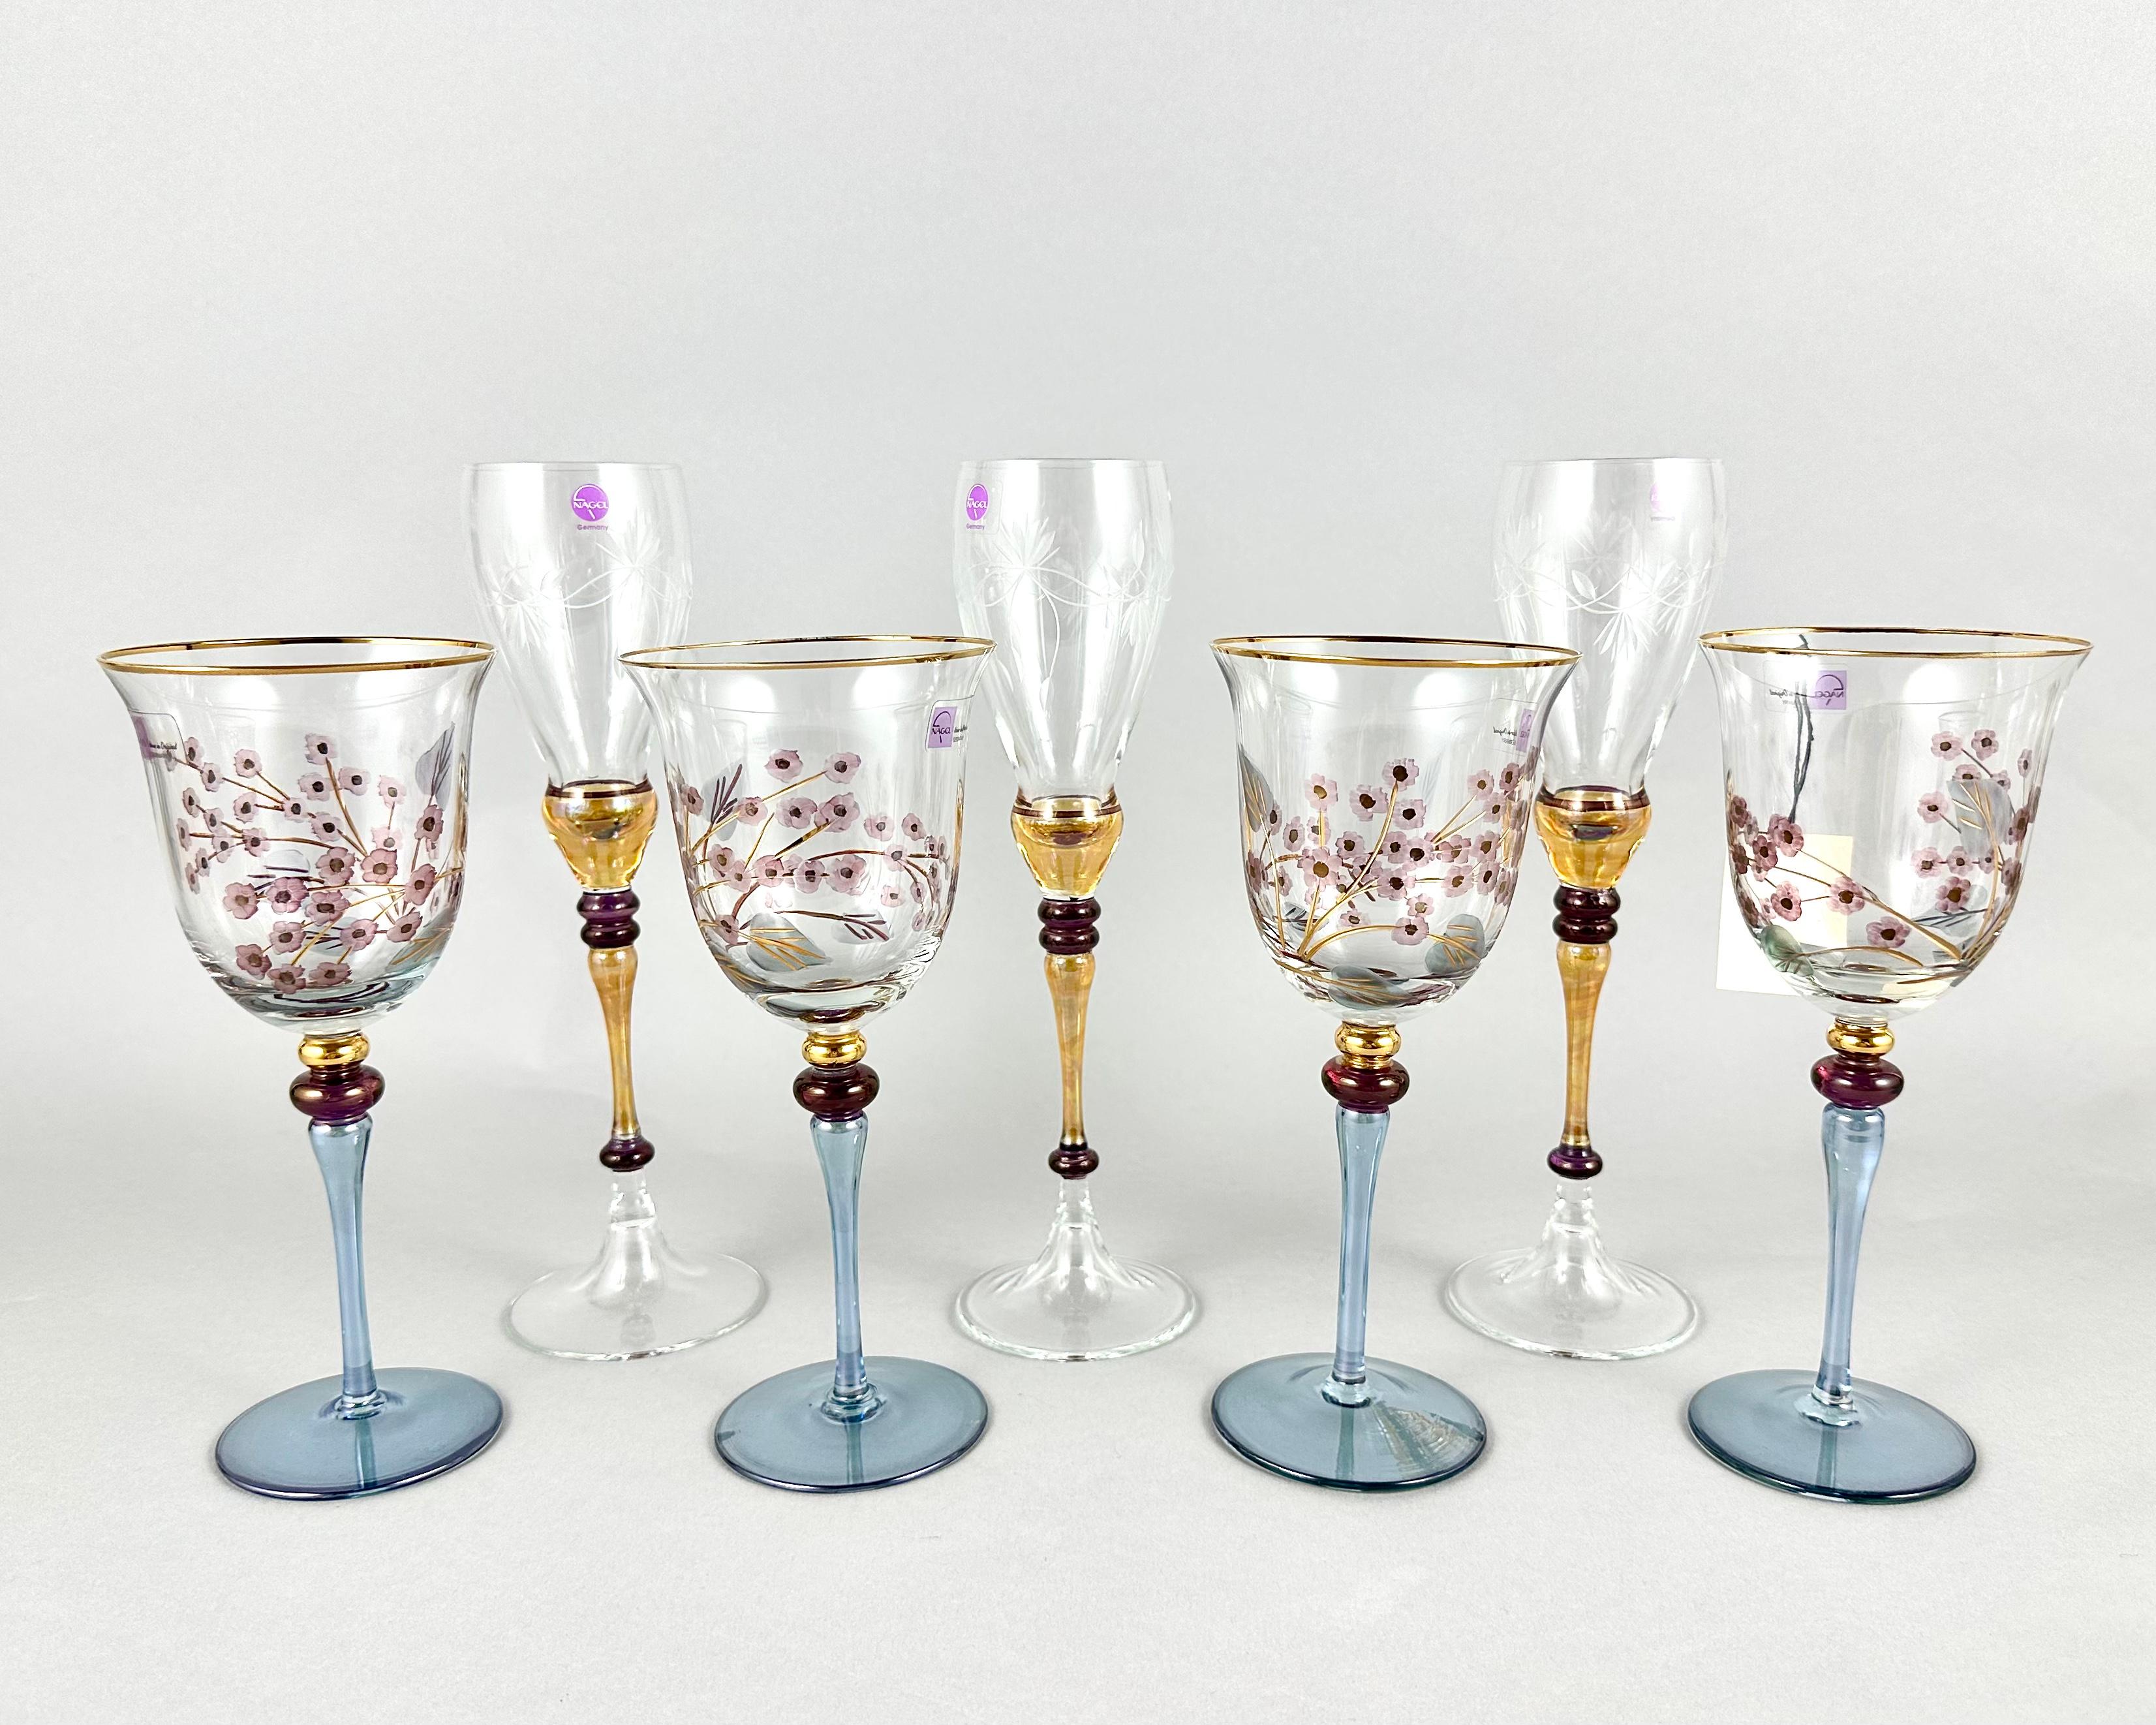 Unique Barware Set Of Vintage Wine Champagne Glasses Vases and Decanter by Nagel In Excellent Condition For Sale In Bastogne, BE